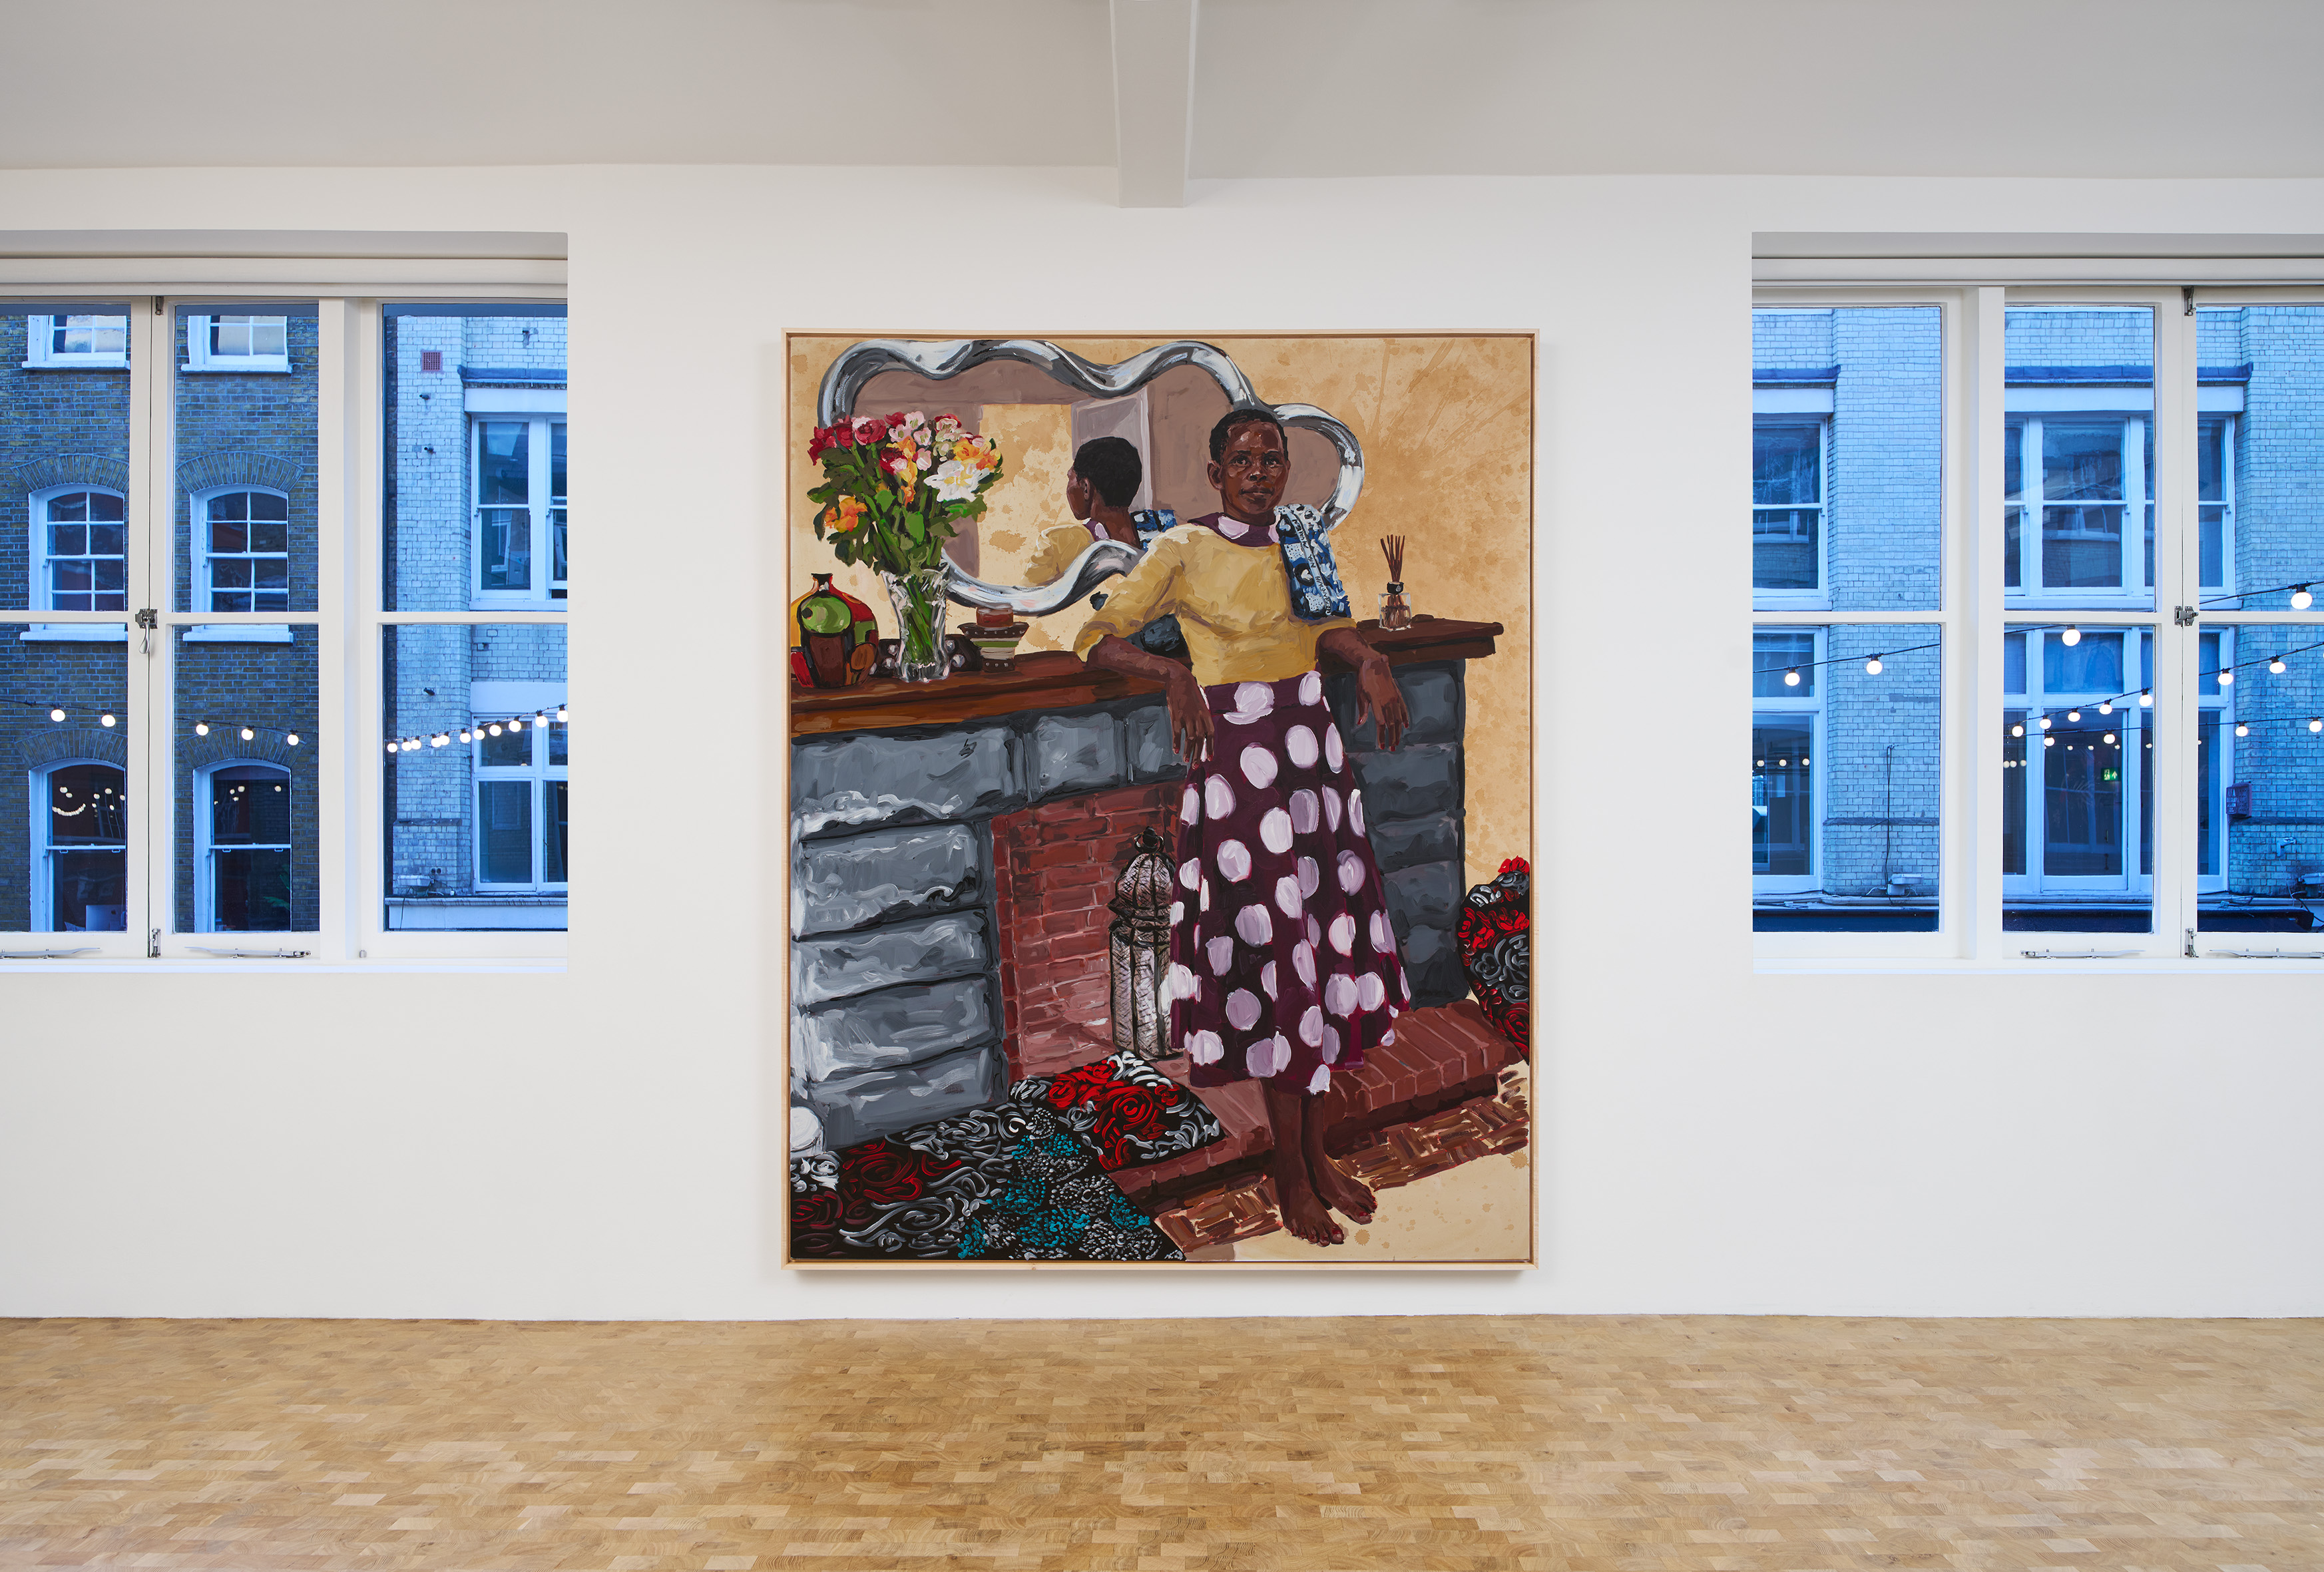 Installation image for Wangari Mathenge: A Day of Rest, at Pippy Houldsworth Gallery